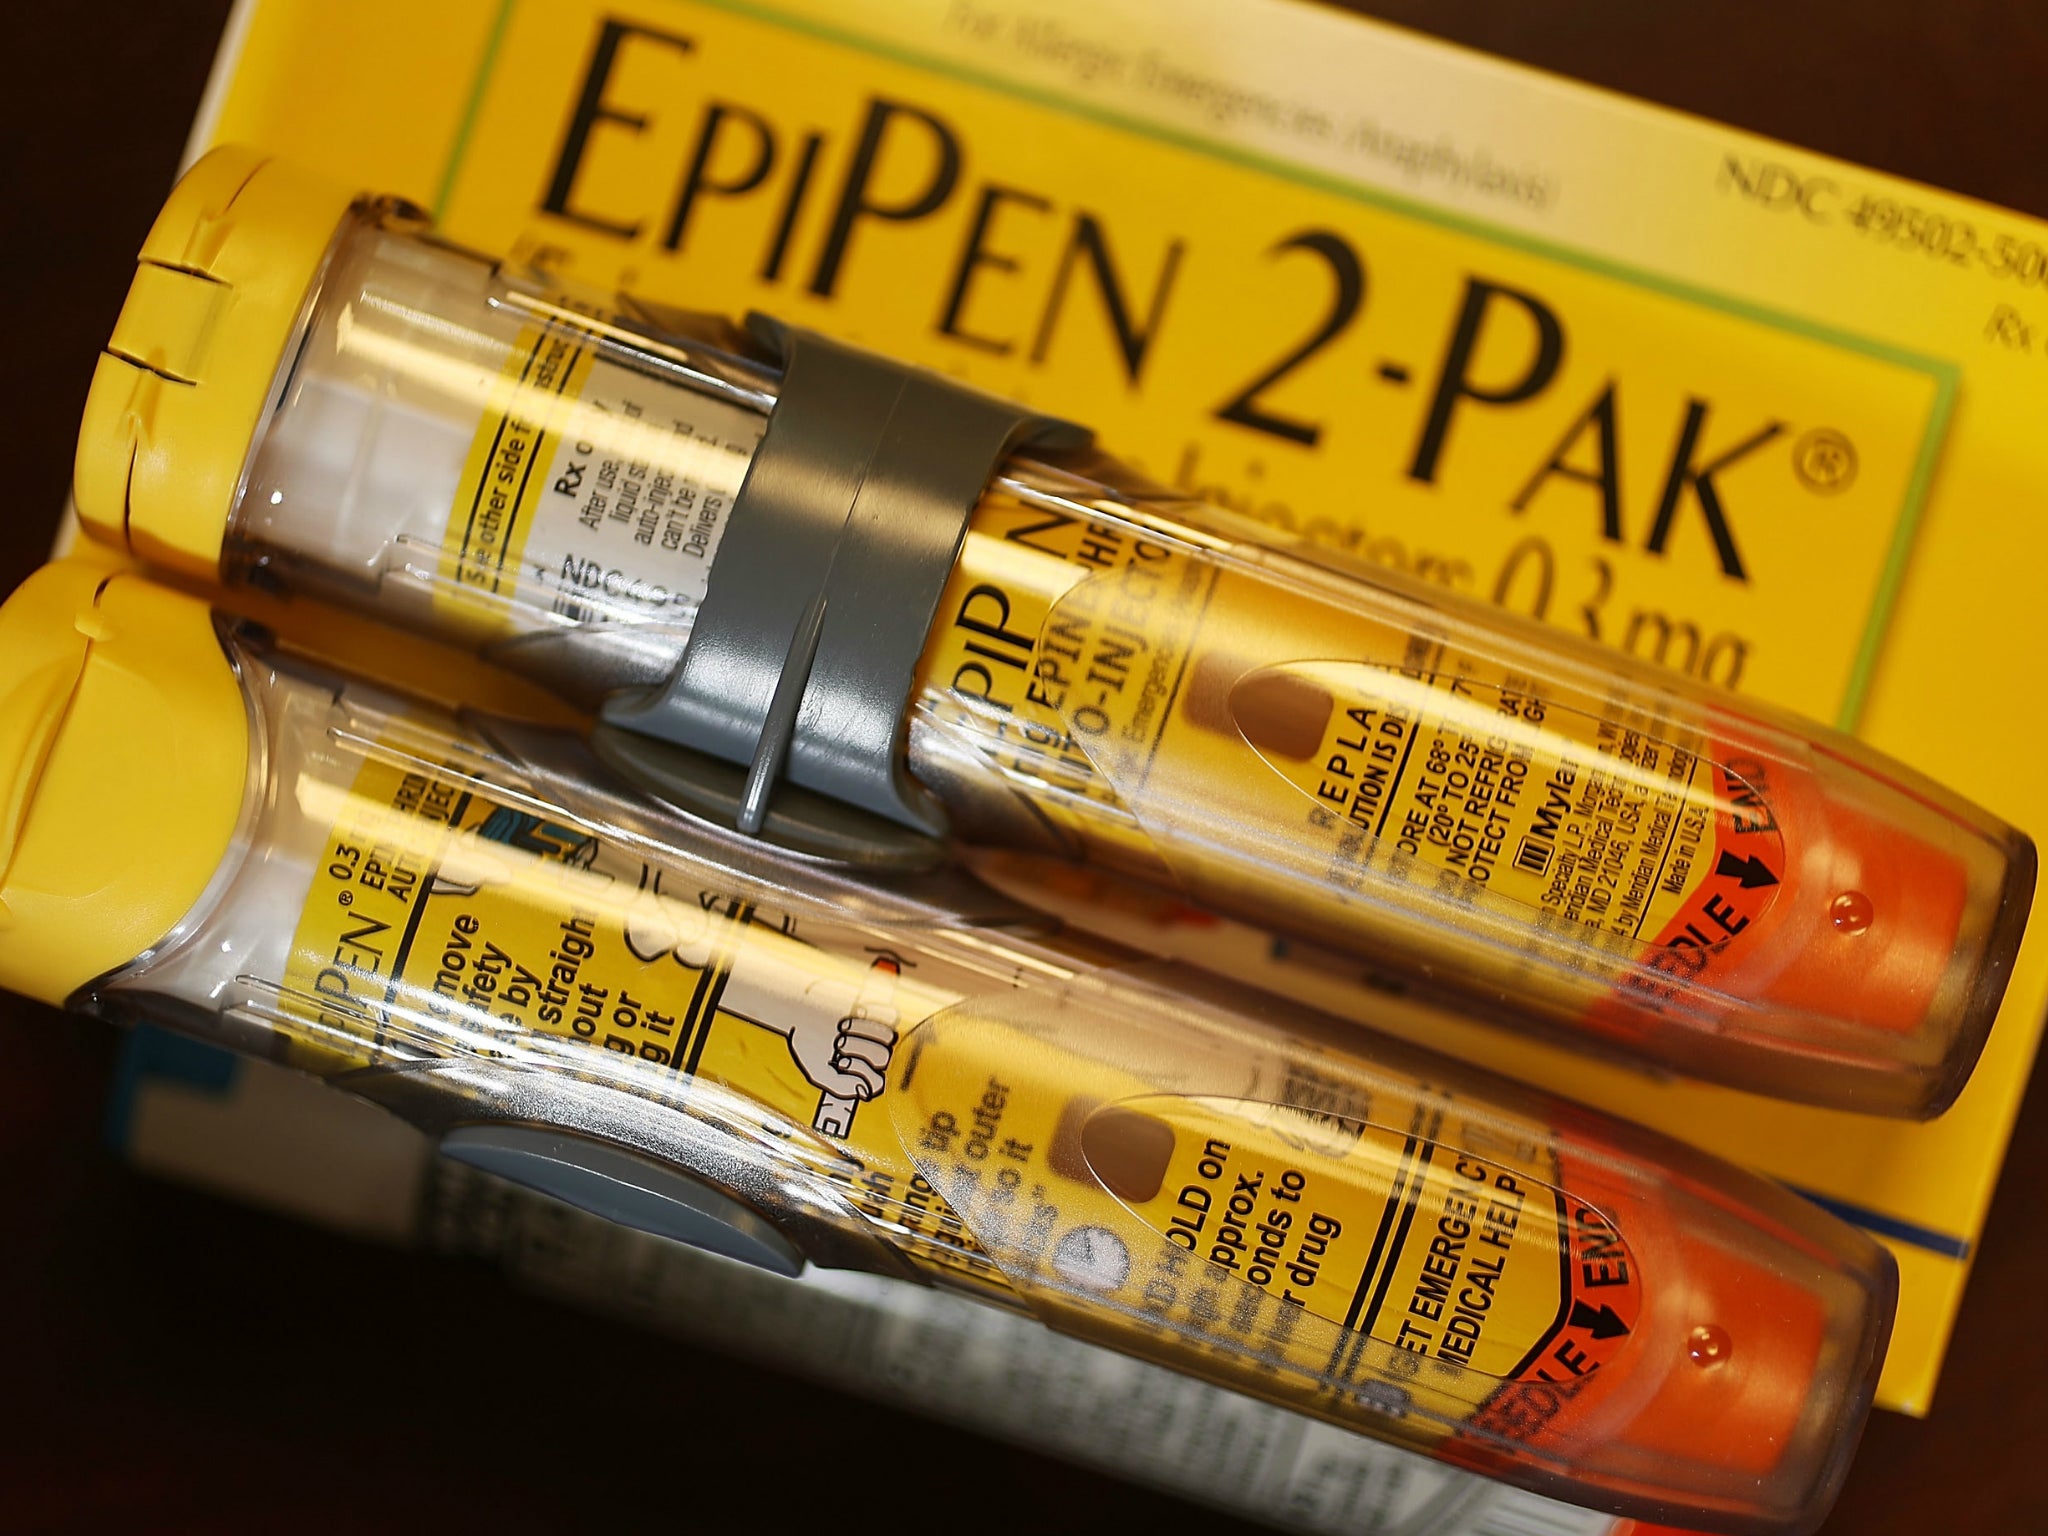 A generic version of the auto-injectable EpiPen, used as an emergency treatment for allergic reactions, has been approved by the US Food and Drug Administration